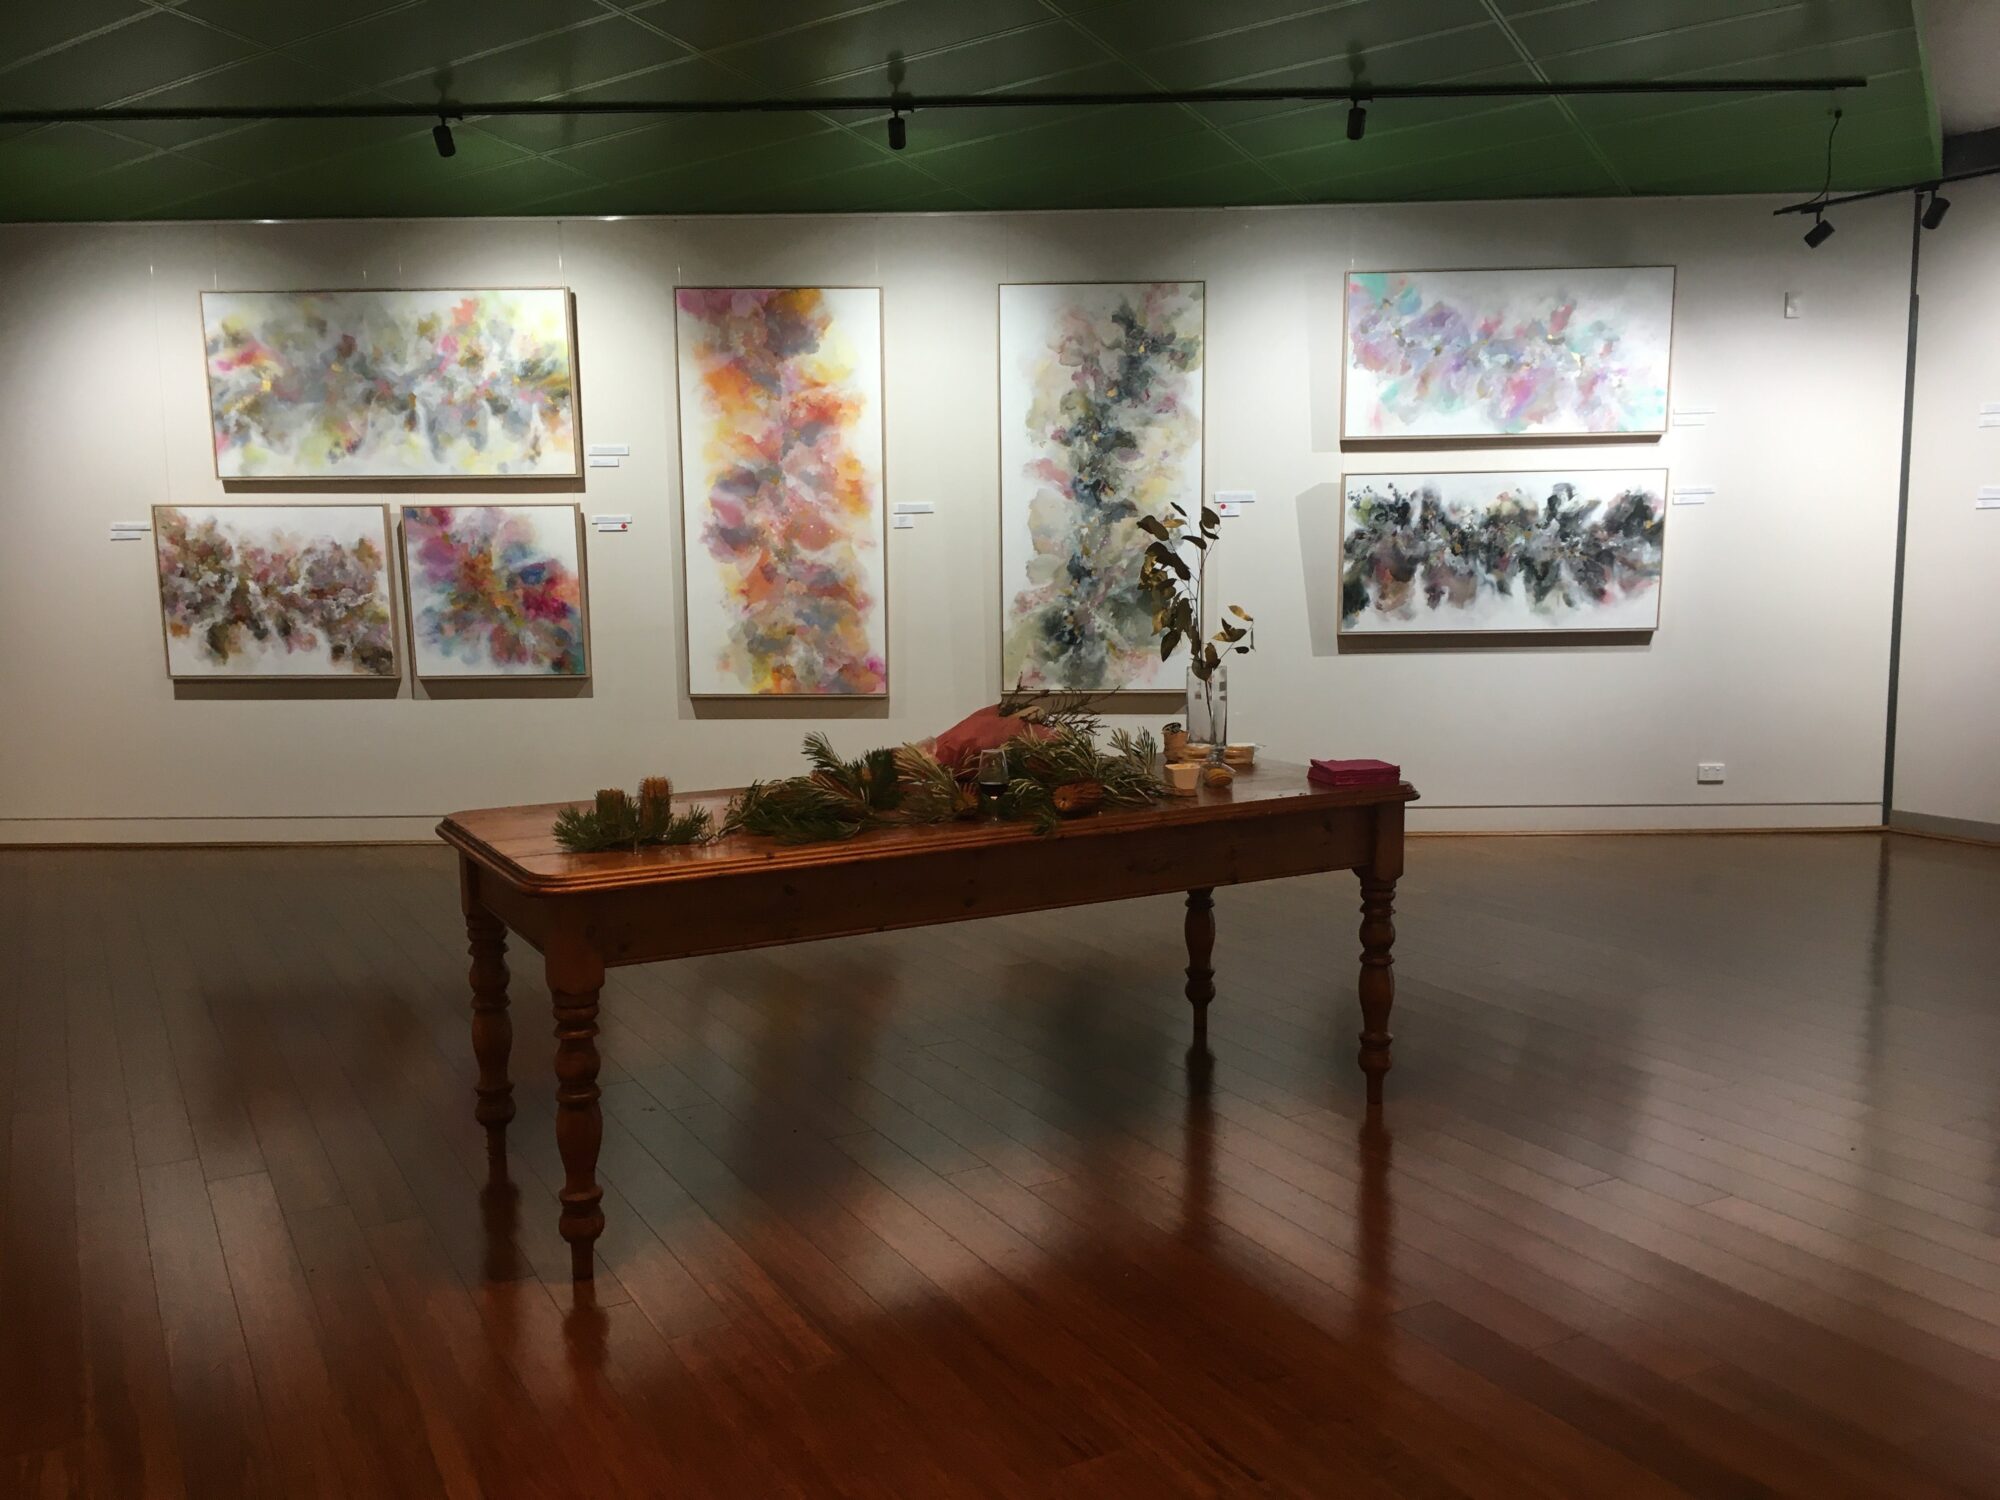 Artworks on display in the gallery